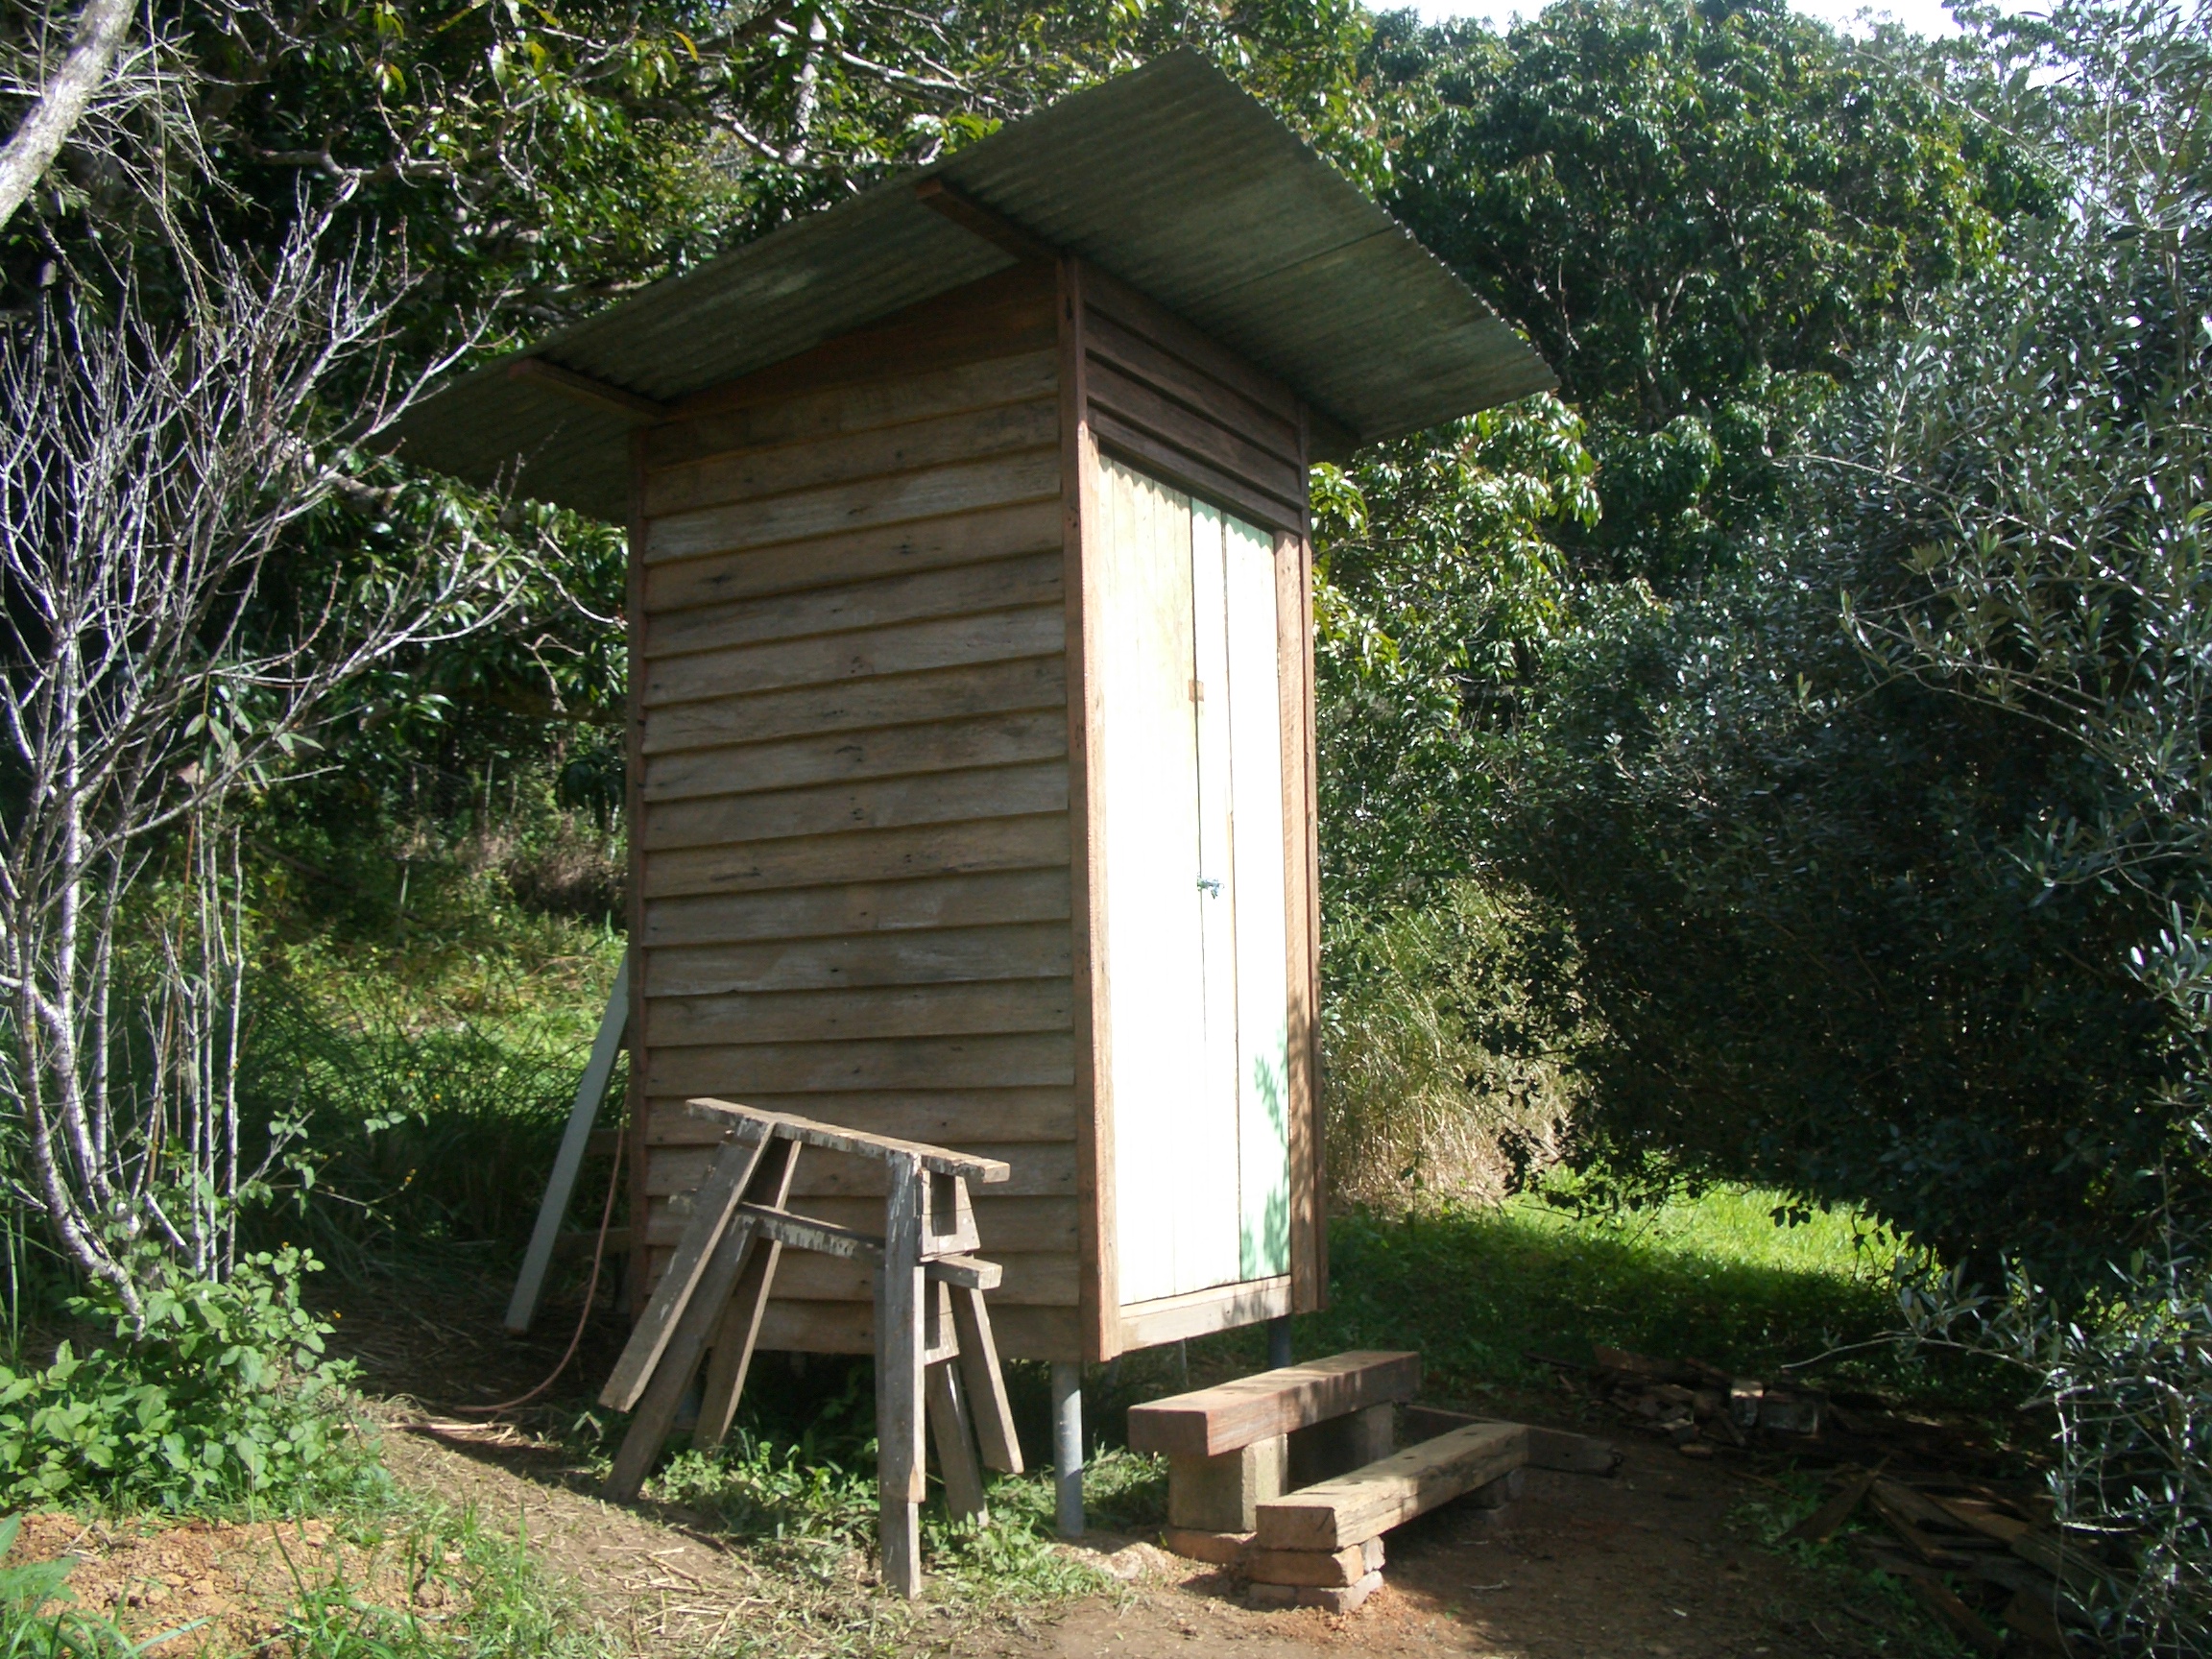 The new outhouse at the Permaculture Research Institute Maungaraeeda, Sunshine Coast